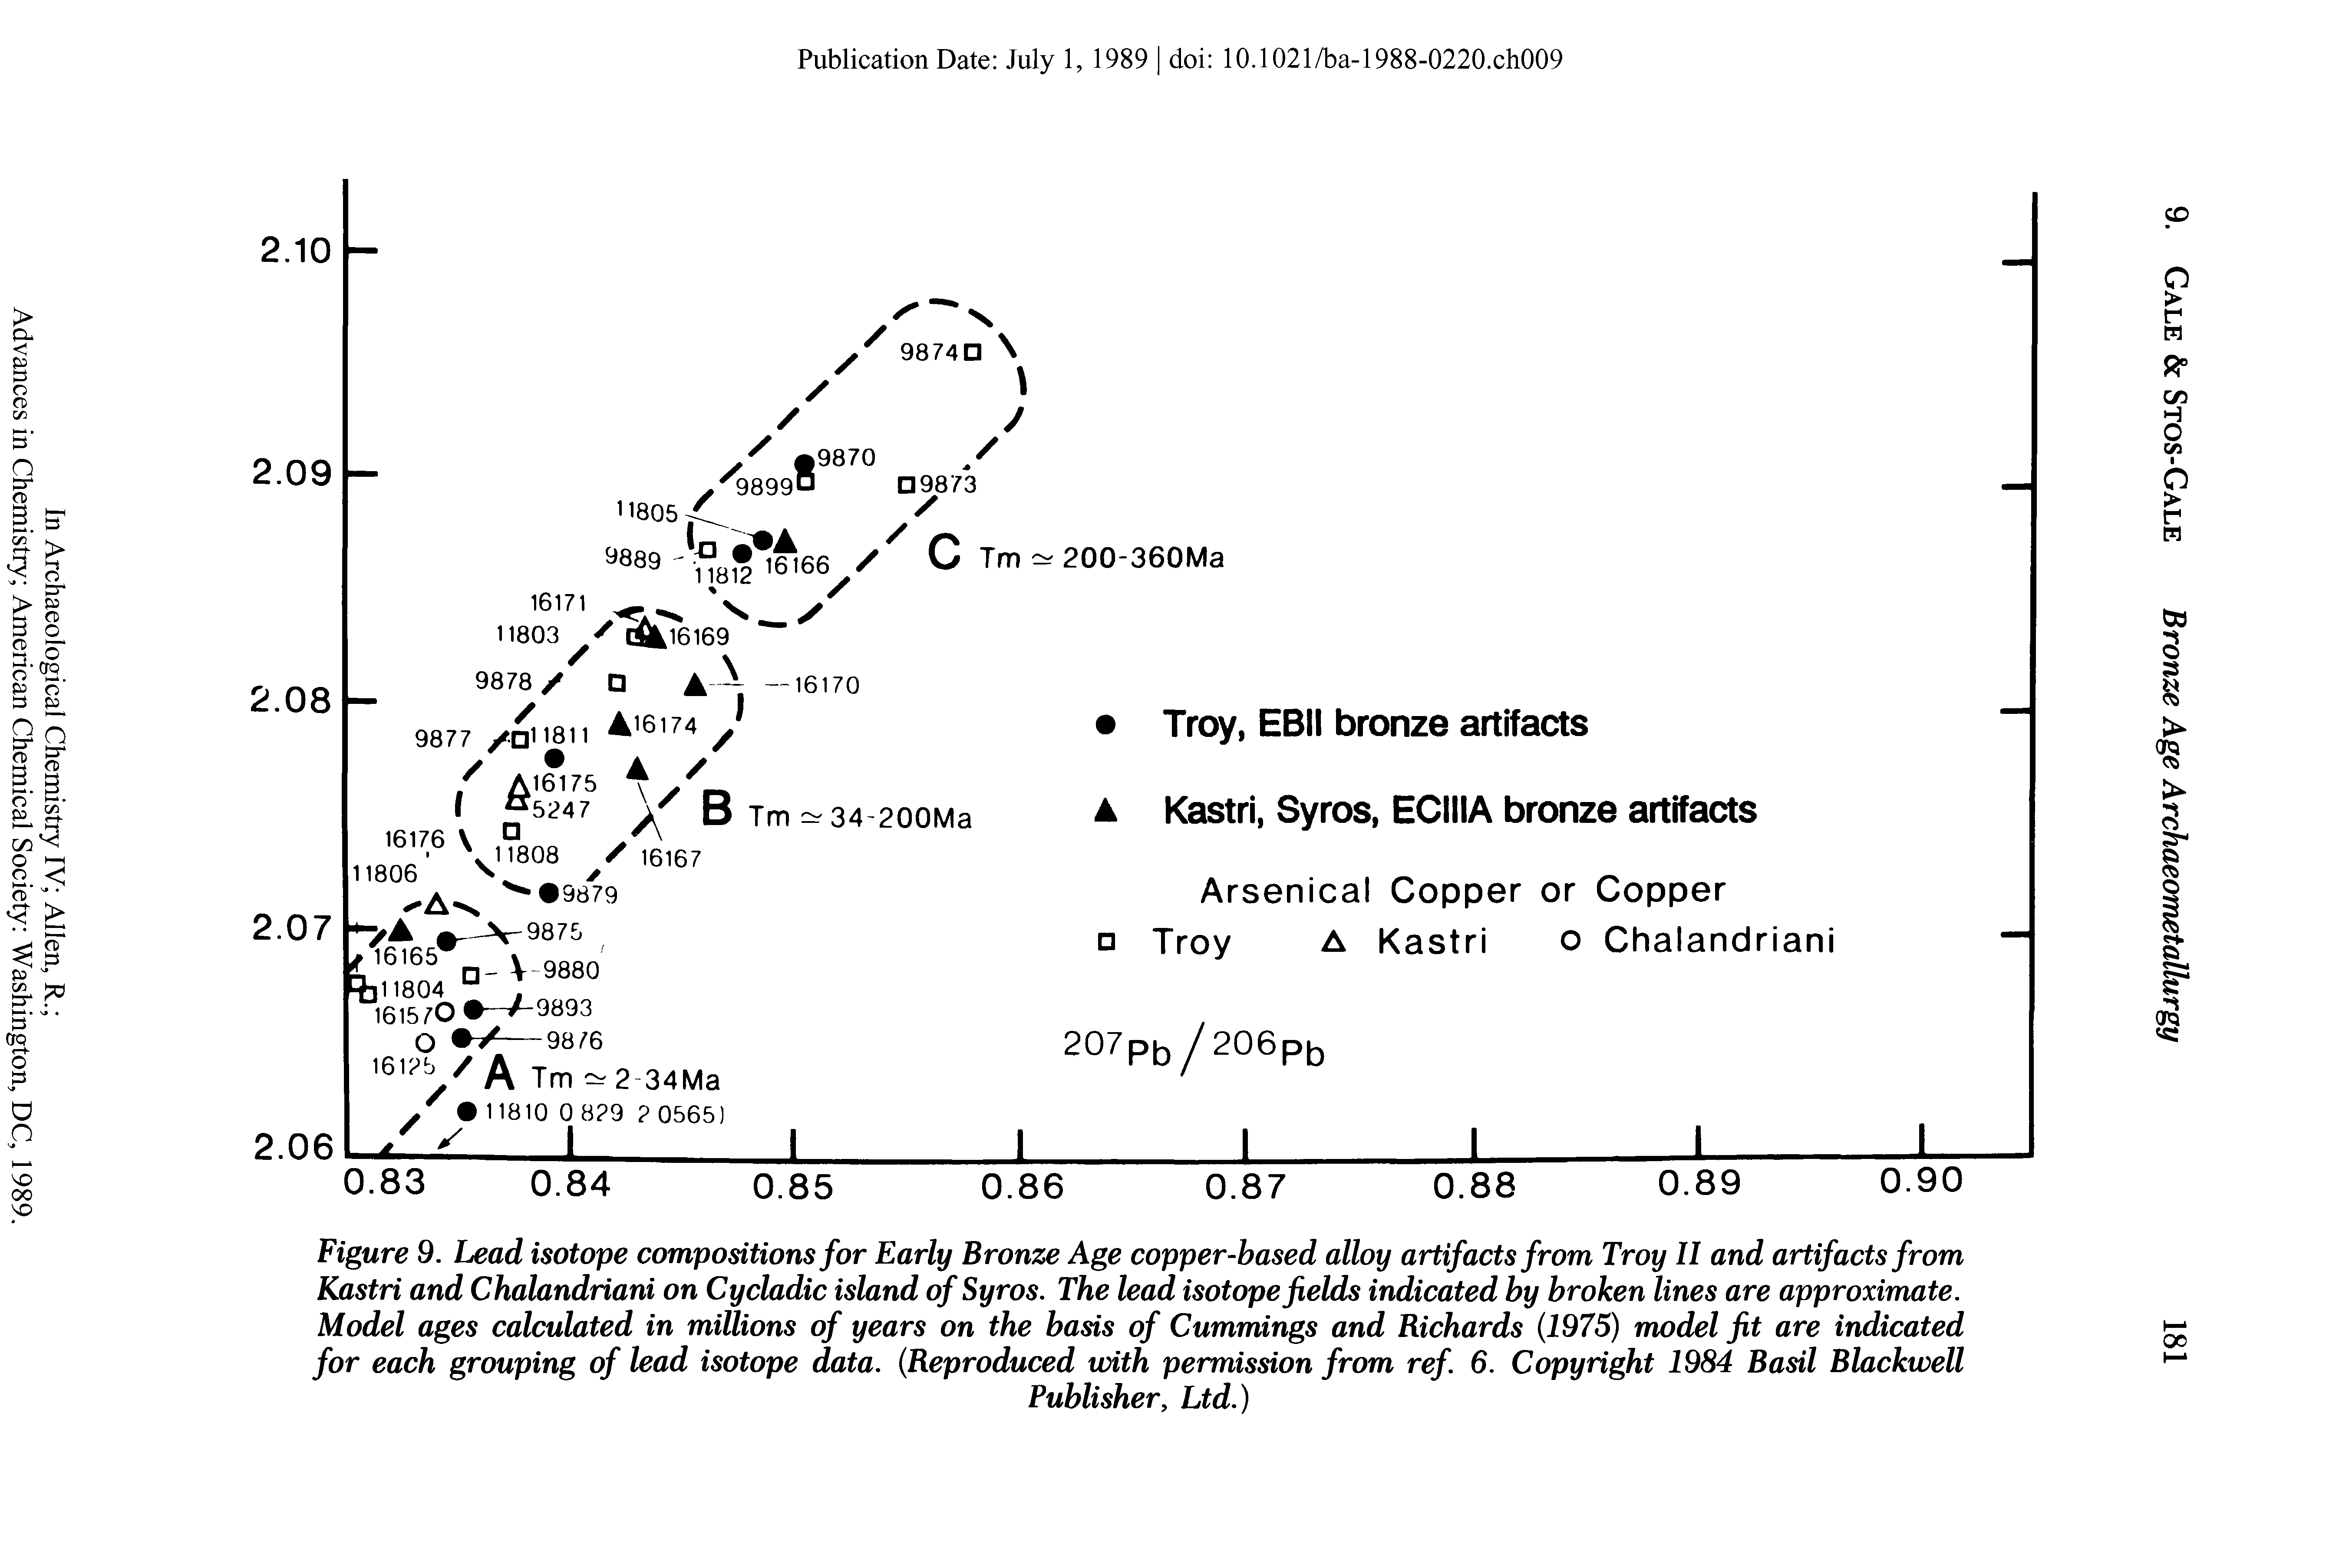 Figure 9. Lead isotope compositions for Early Bronze Age copper-based alloy artifacts from Troy II and artifacts from Kastri and Chalandriani on Cycladic island of Syros. The lead isotope fields indicated by broken lines are approximate. Model ages calculated in millions of years on the basis of Cummings and Richards (1975) model Jit are indicated for each grouping of lead isotope data. (Reproduced with permission from ref. 6. Copyright 1984 Basil Blackwell...